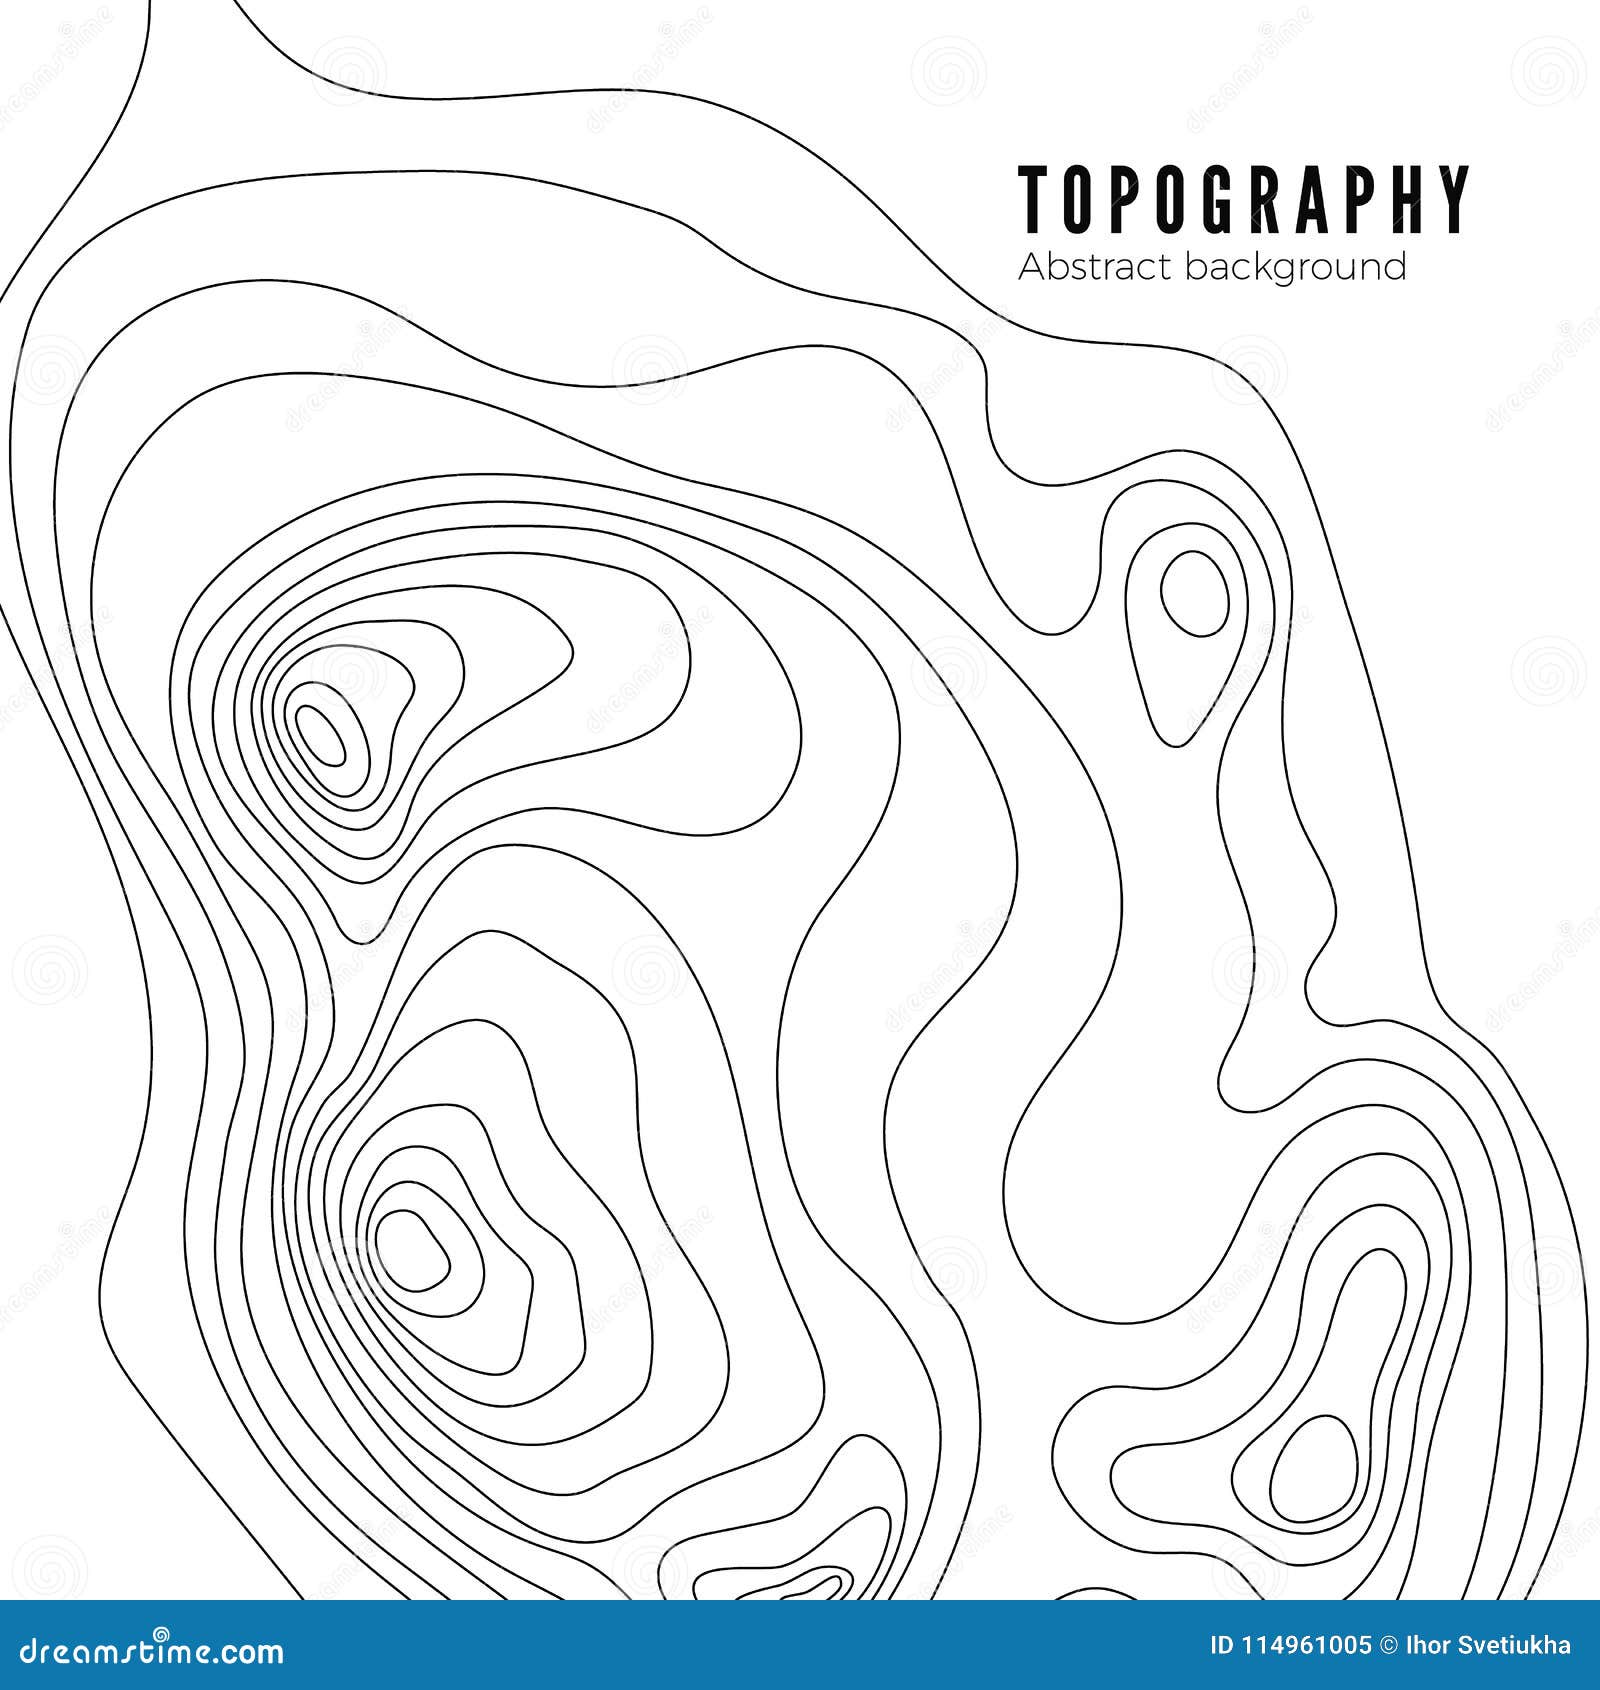 topographic map contour background pattern. contour landscape map concept. abstract geographic world topography map